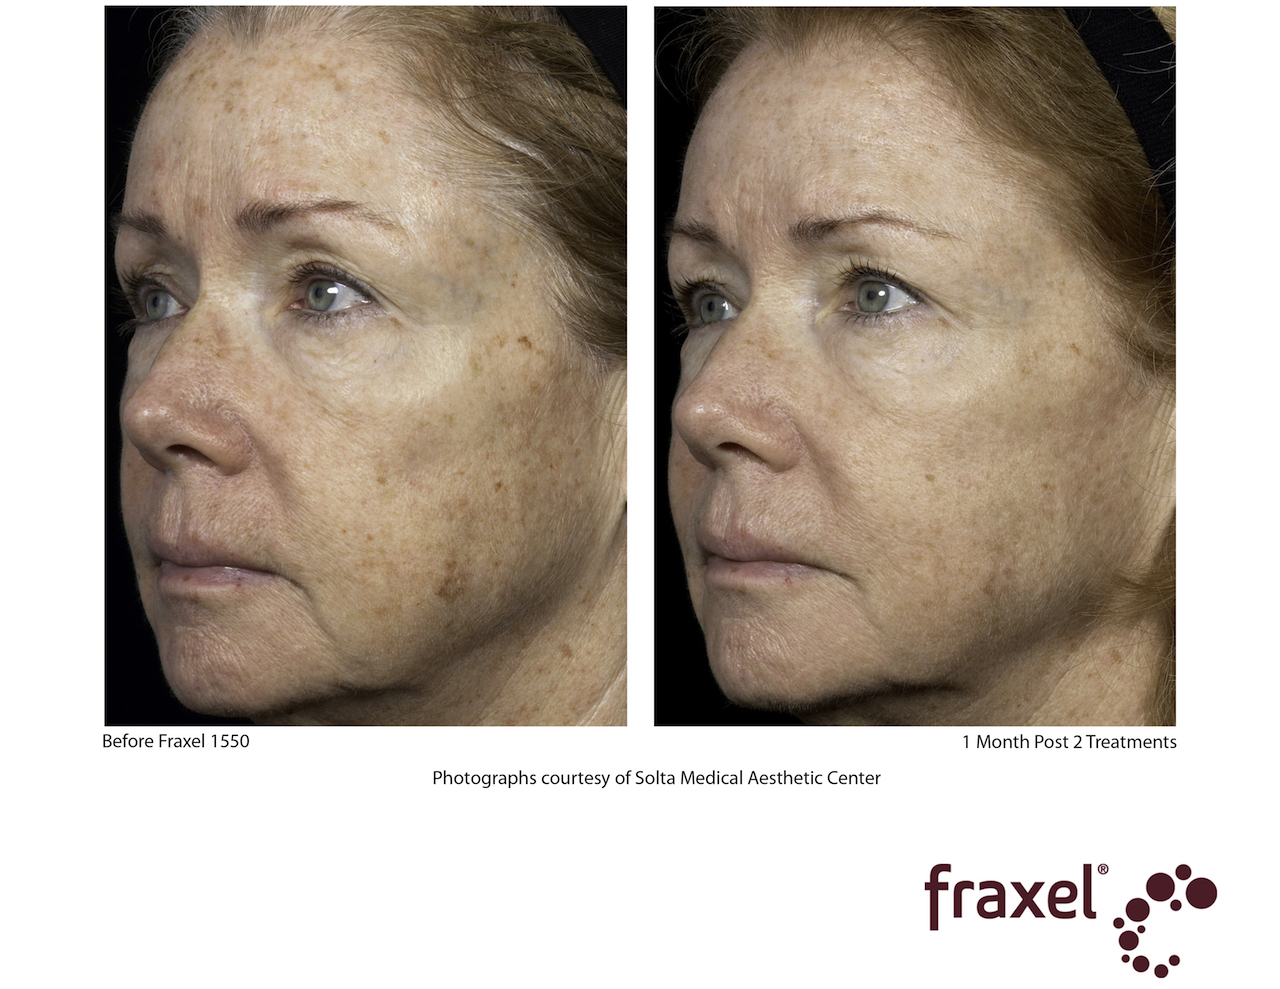 Fraxel treatment before and after